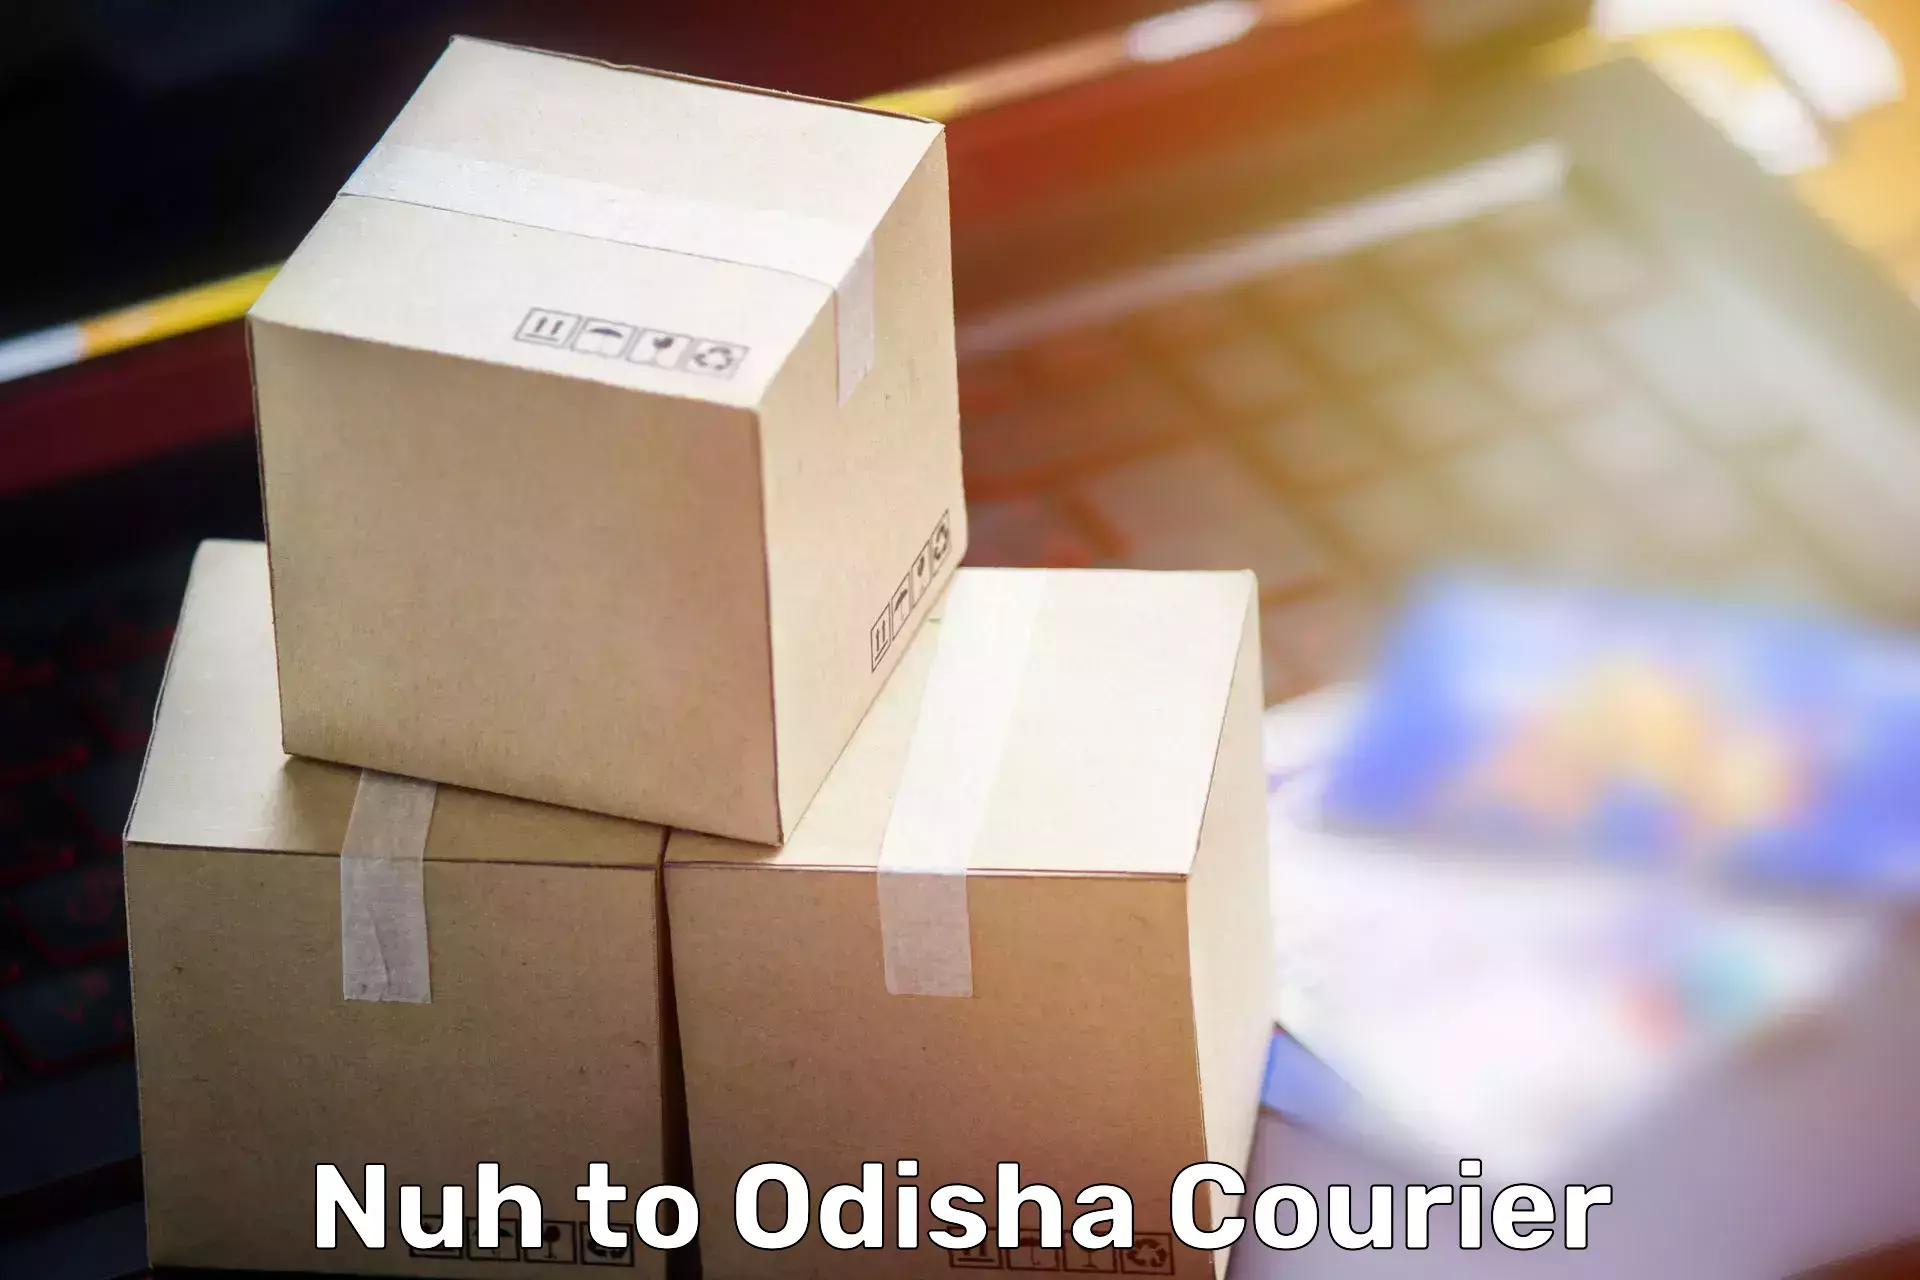 Furniture delivery service Nuh to Pallahara